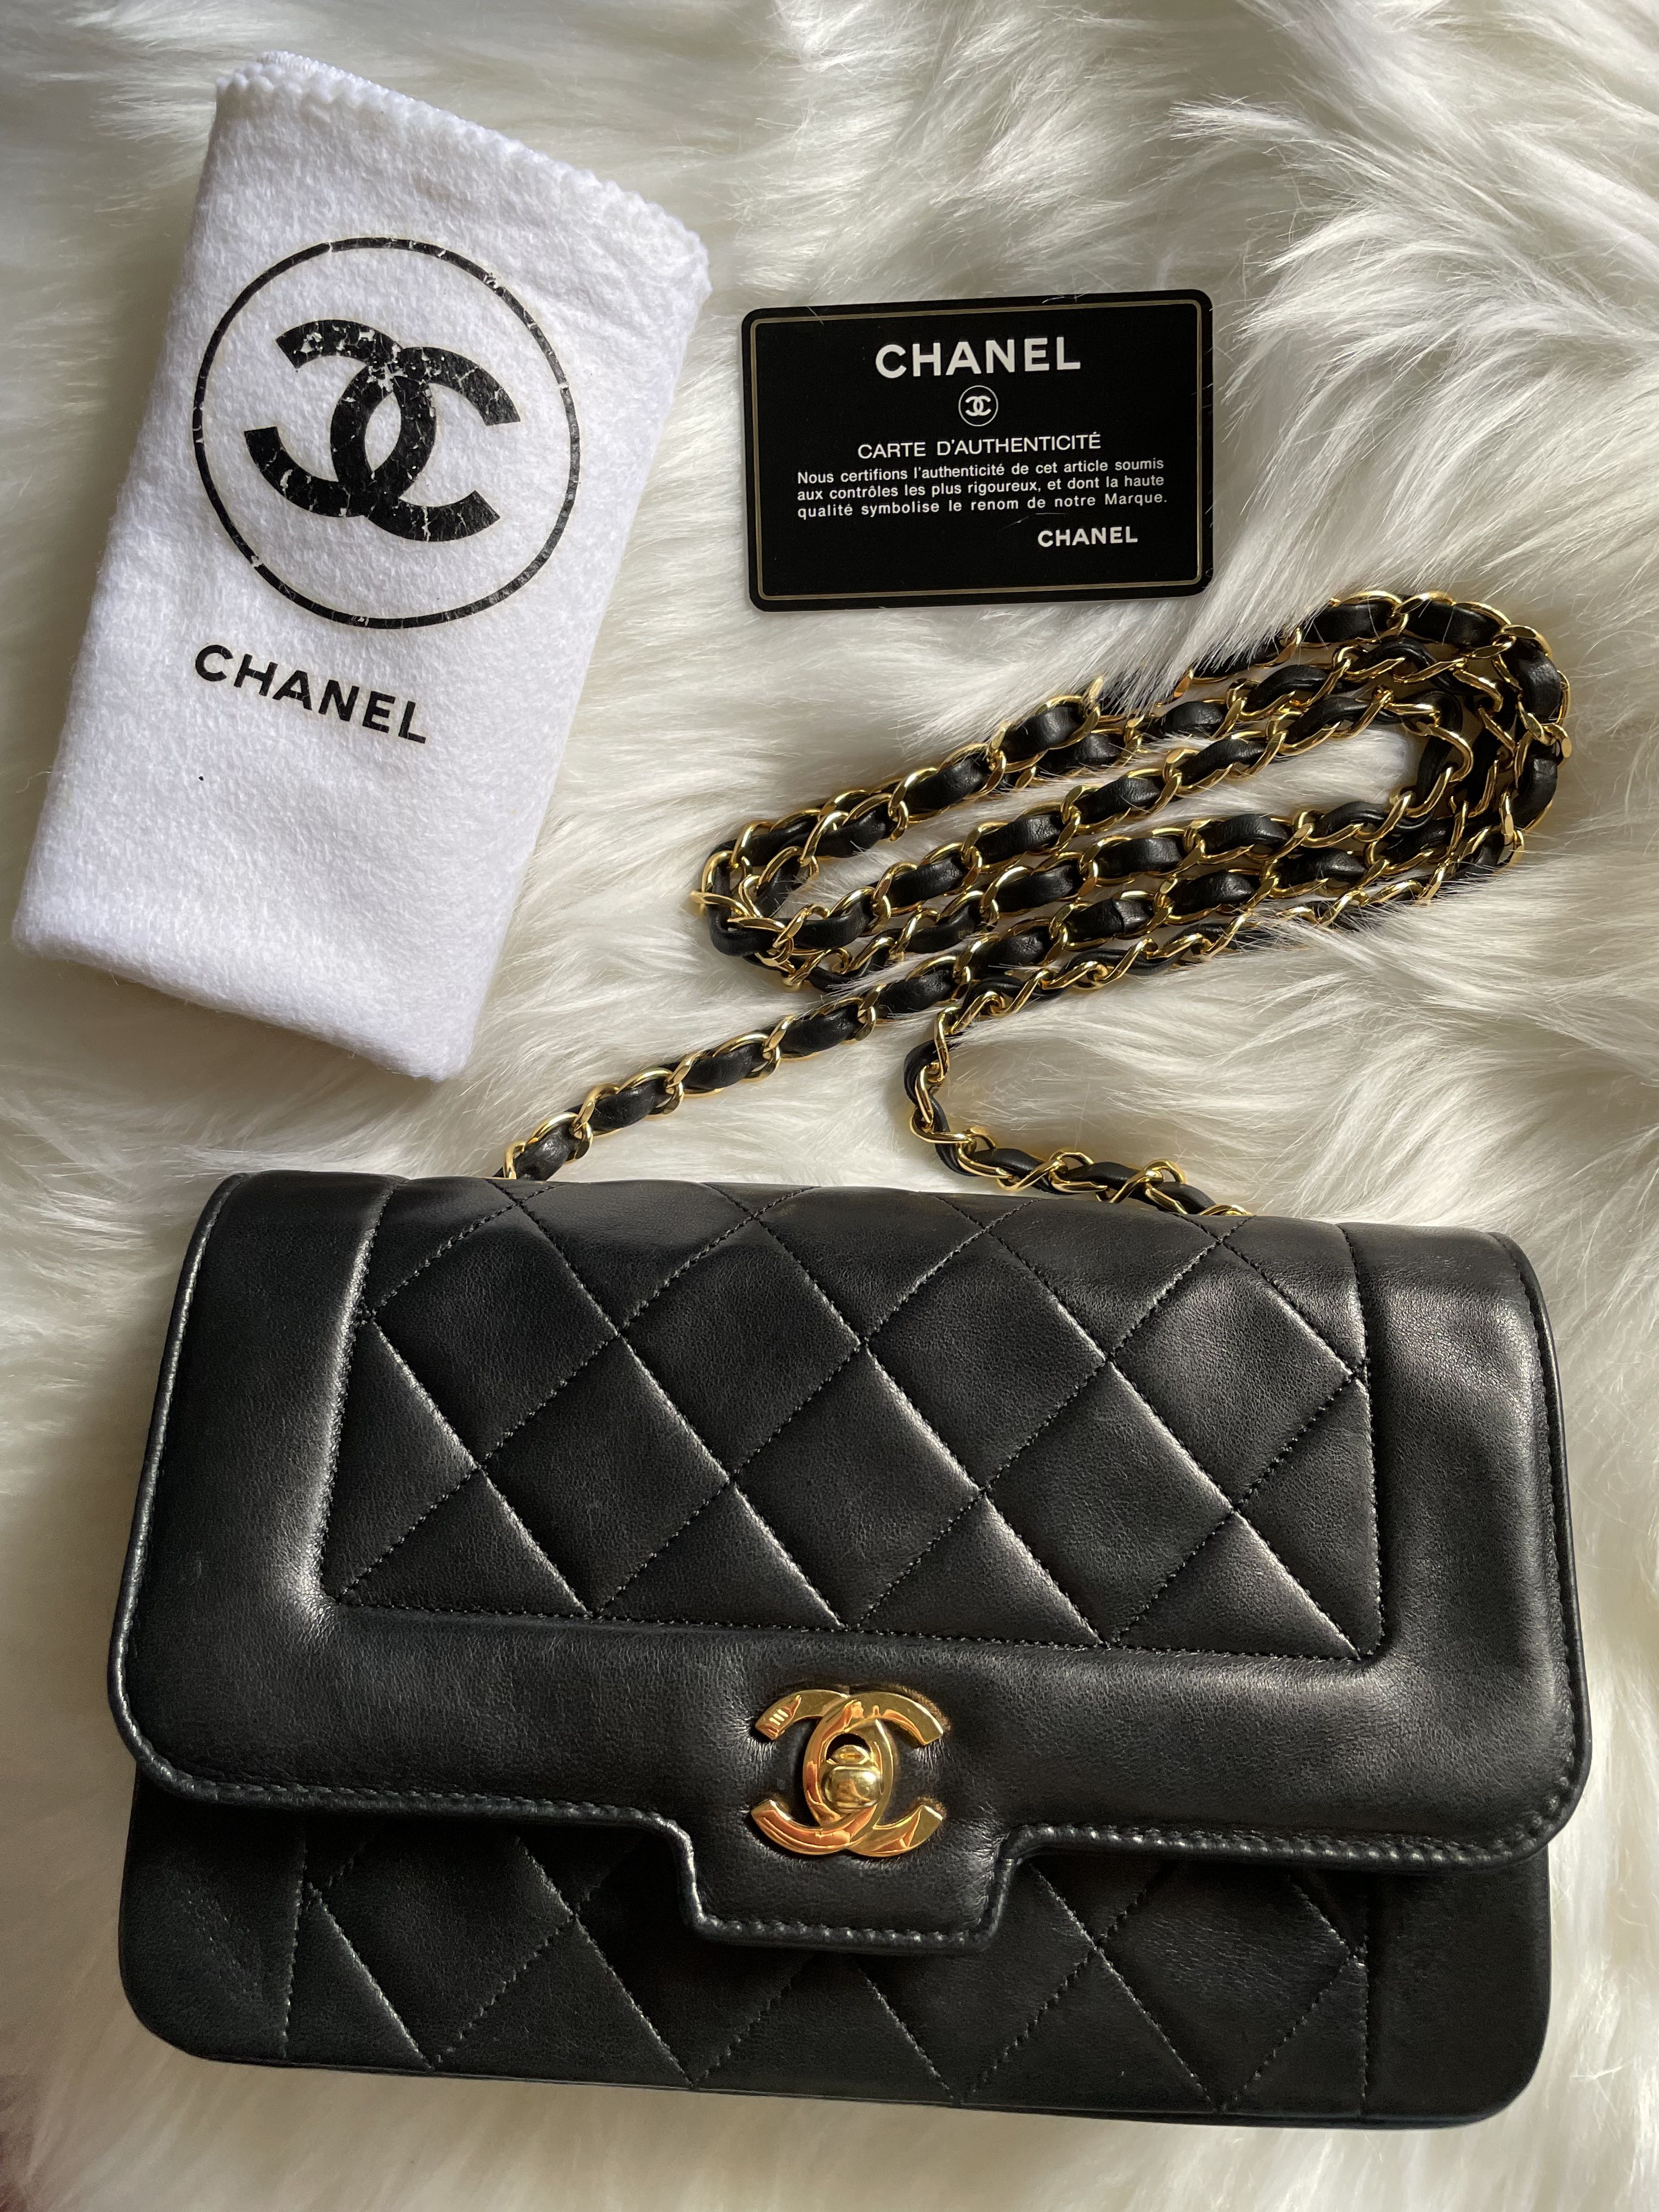 Authentic Chanel vintage small Diana flap bag in buttery black